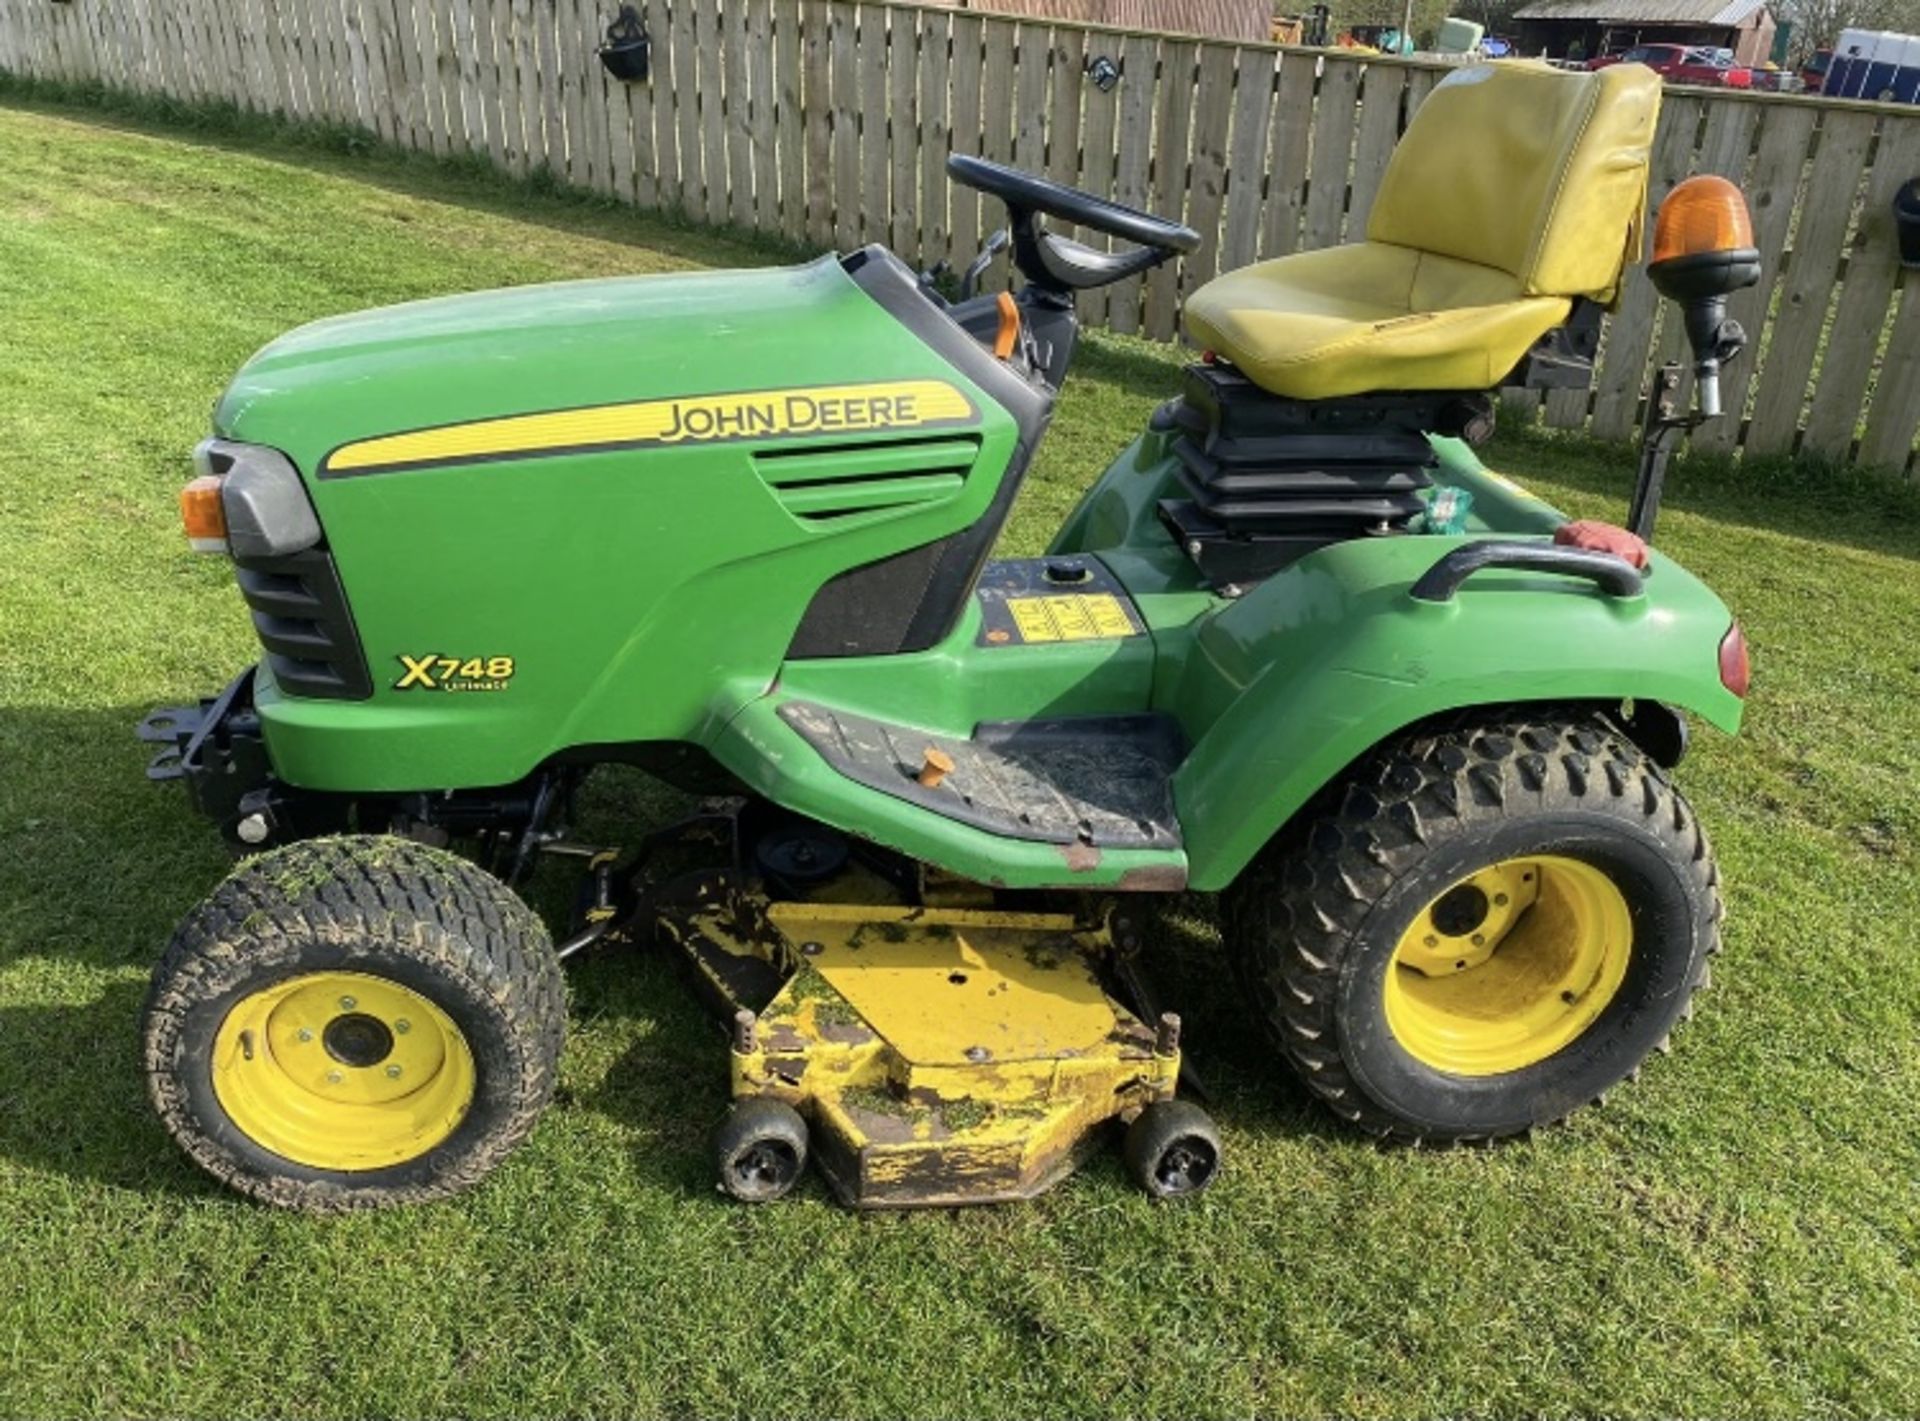 JOHN DEERE X748 DIESEL 4WD COMPANY TRACTOR RIDE ON MOWER LOCATION NORTH YORKSHIRE - Image 2 of 7